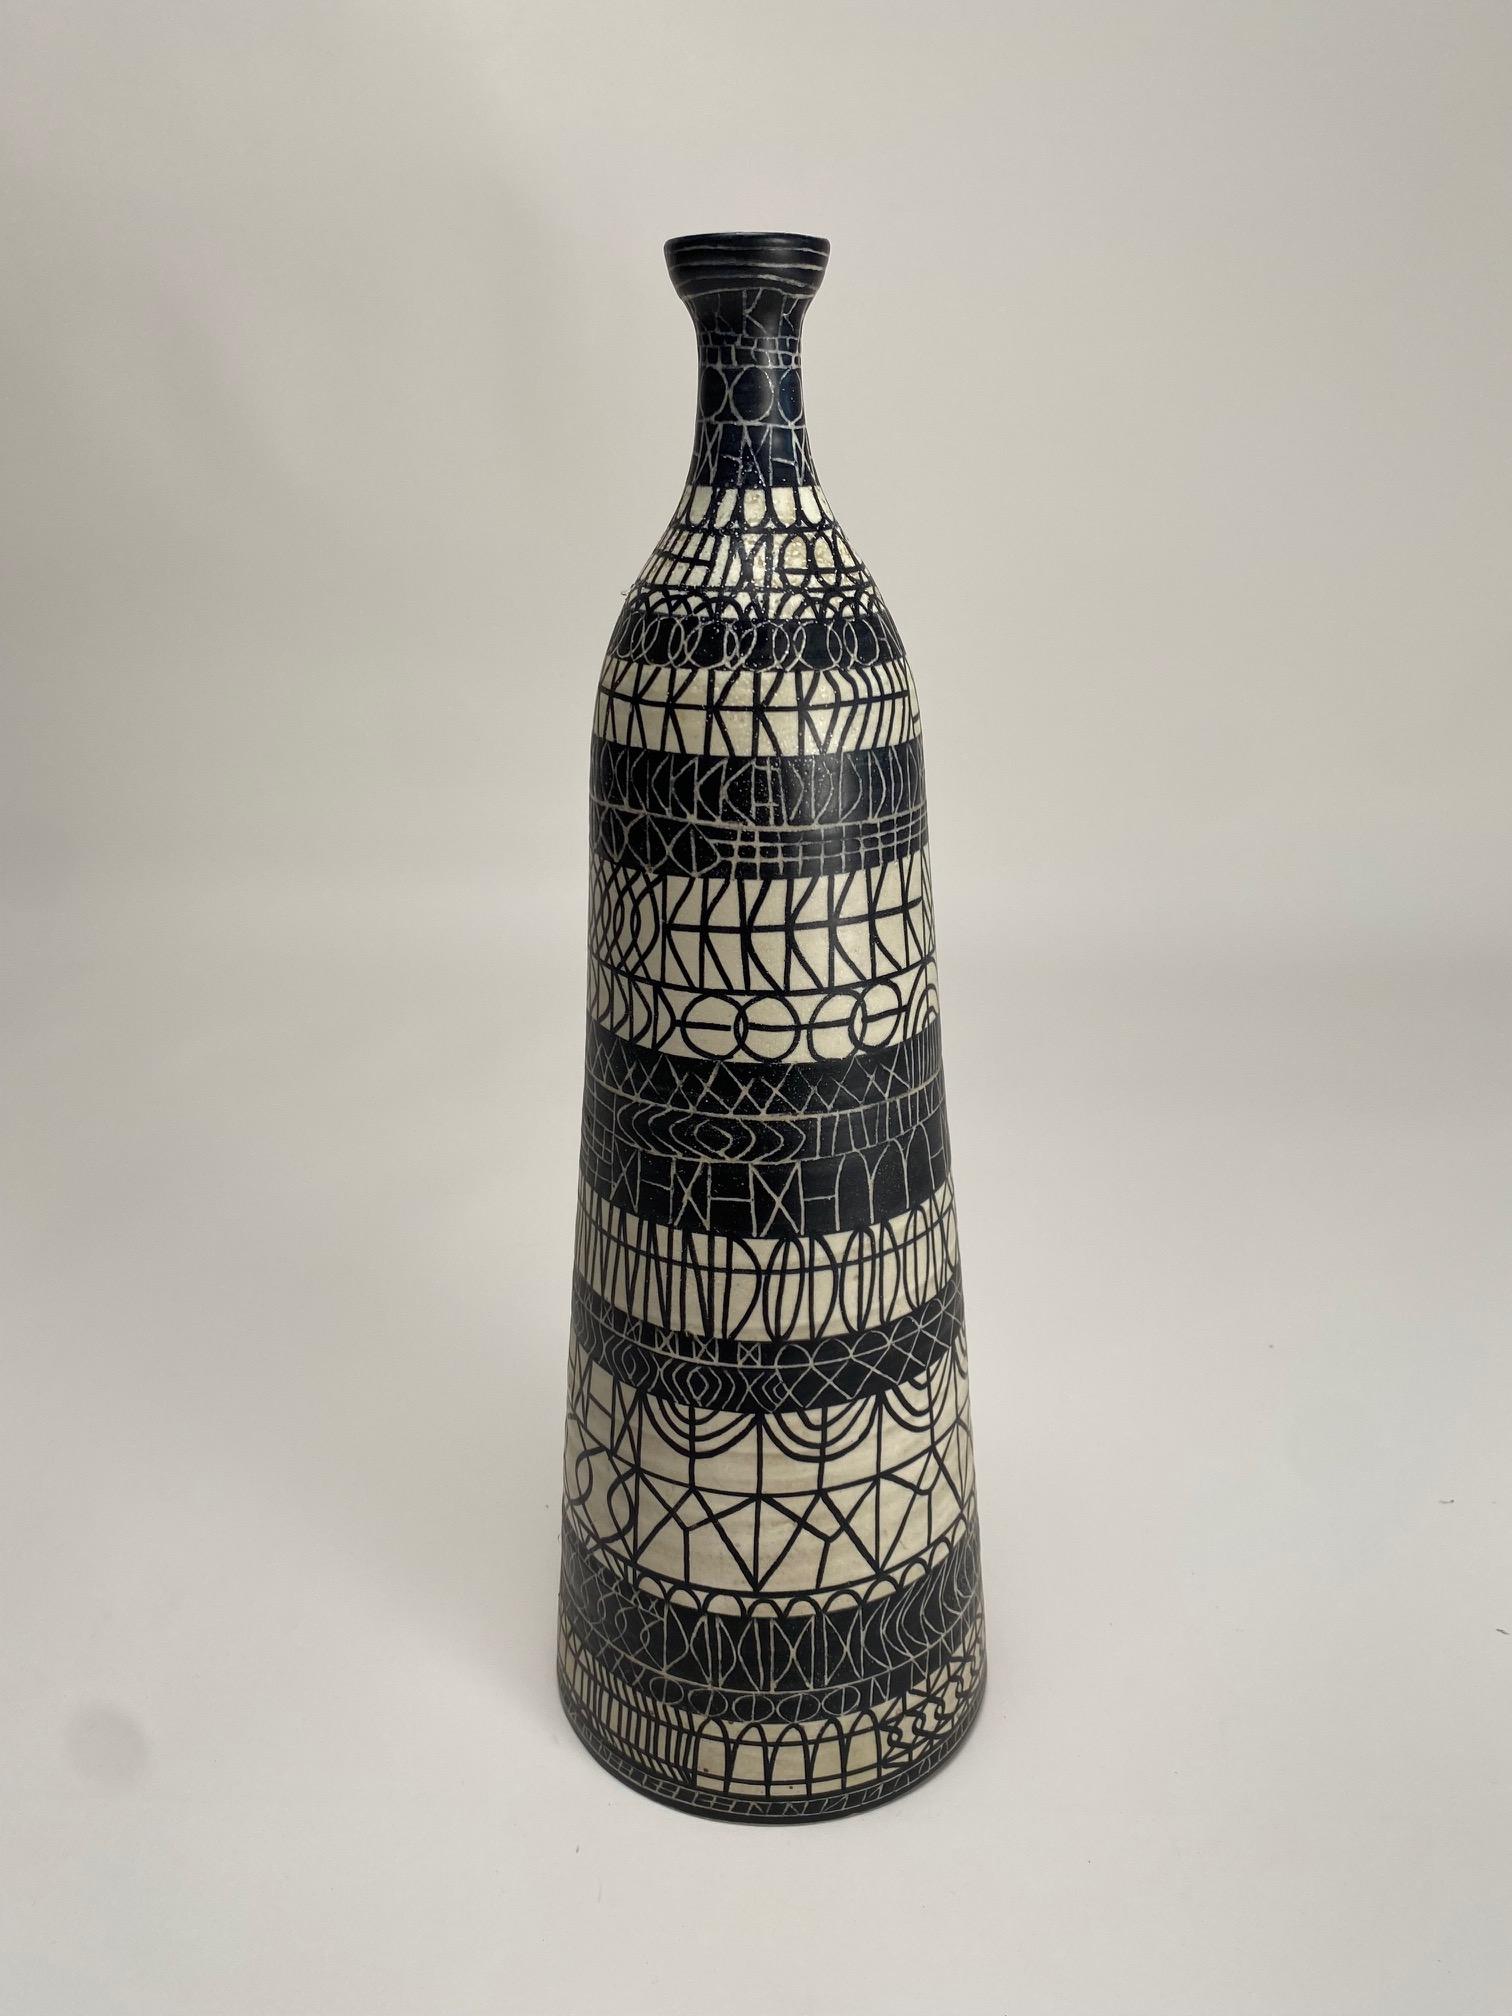 Large ceramic bottle, Atelier Mascarella, Bologna, 1950s.

Rare ceramic bottle with geometric figure decorations made in Bologna in the 1950s. It is a refined piece of furniture that elegantly embellishes the living context